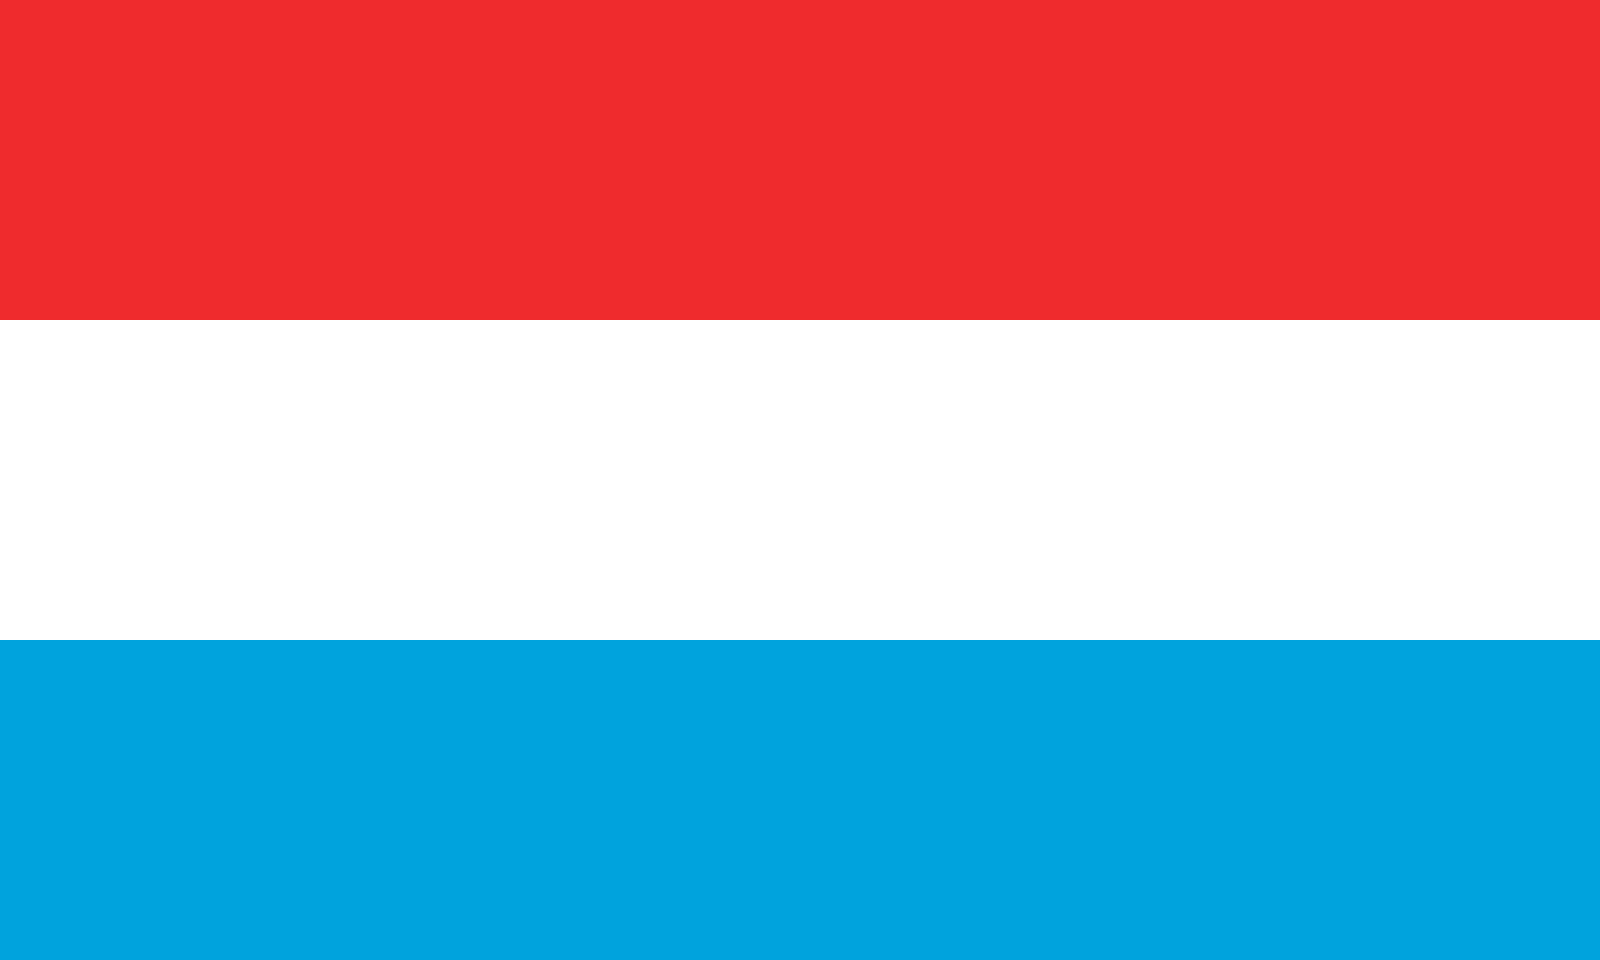 Orange and Blue Flag Logo - Luxembourg. Flags of countries